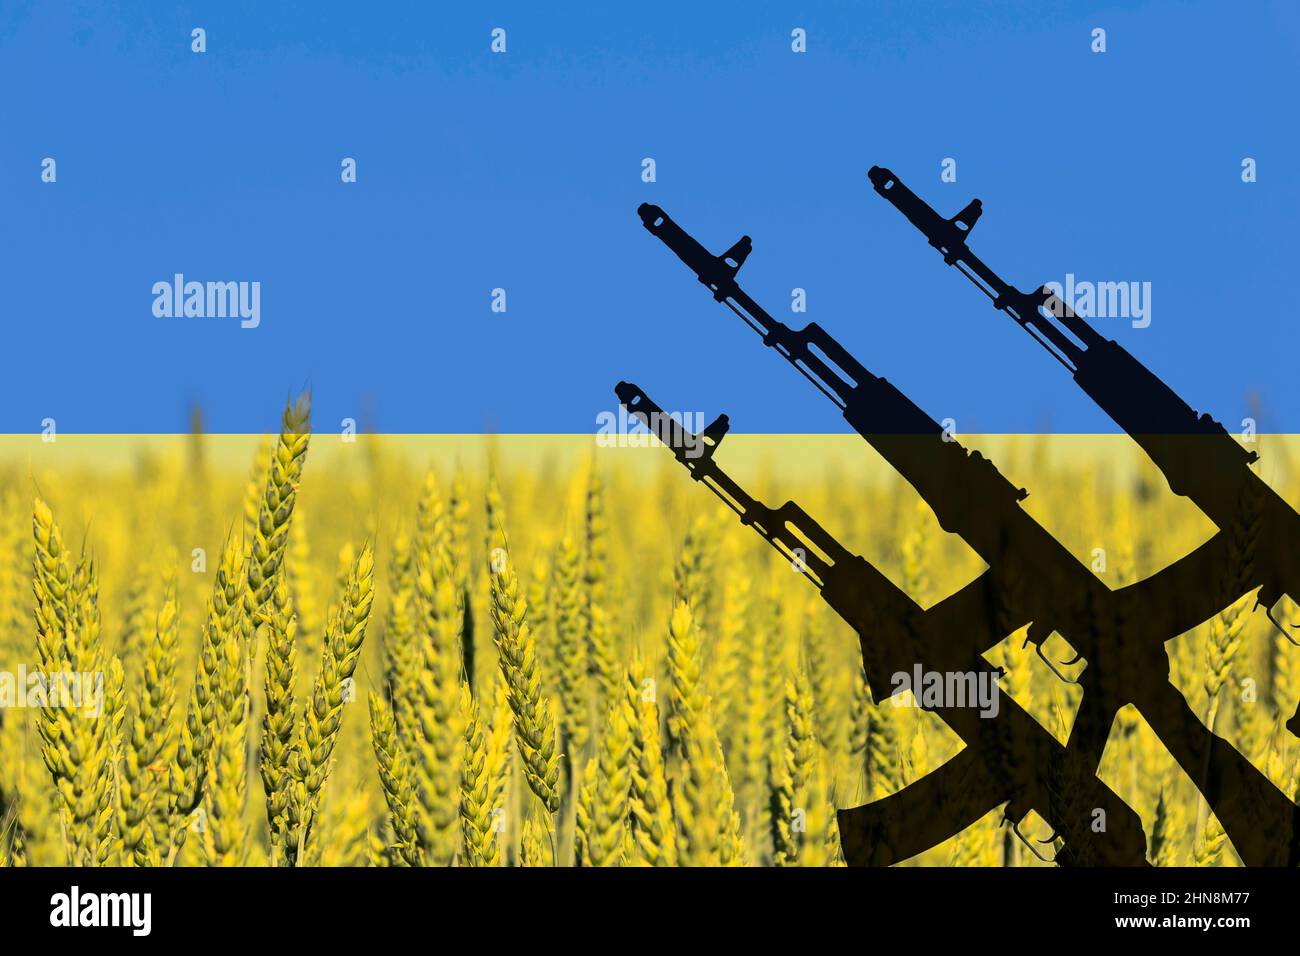 Toned background of the flag of Ukraine with the silhouette of an AK-74 Kalashnikov assault rifle against a wheat field with the sky Stock Photo